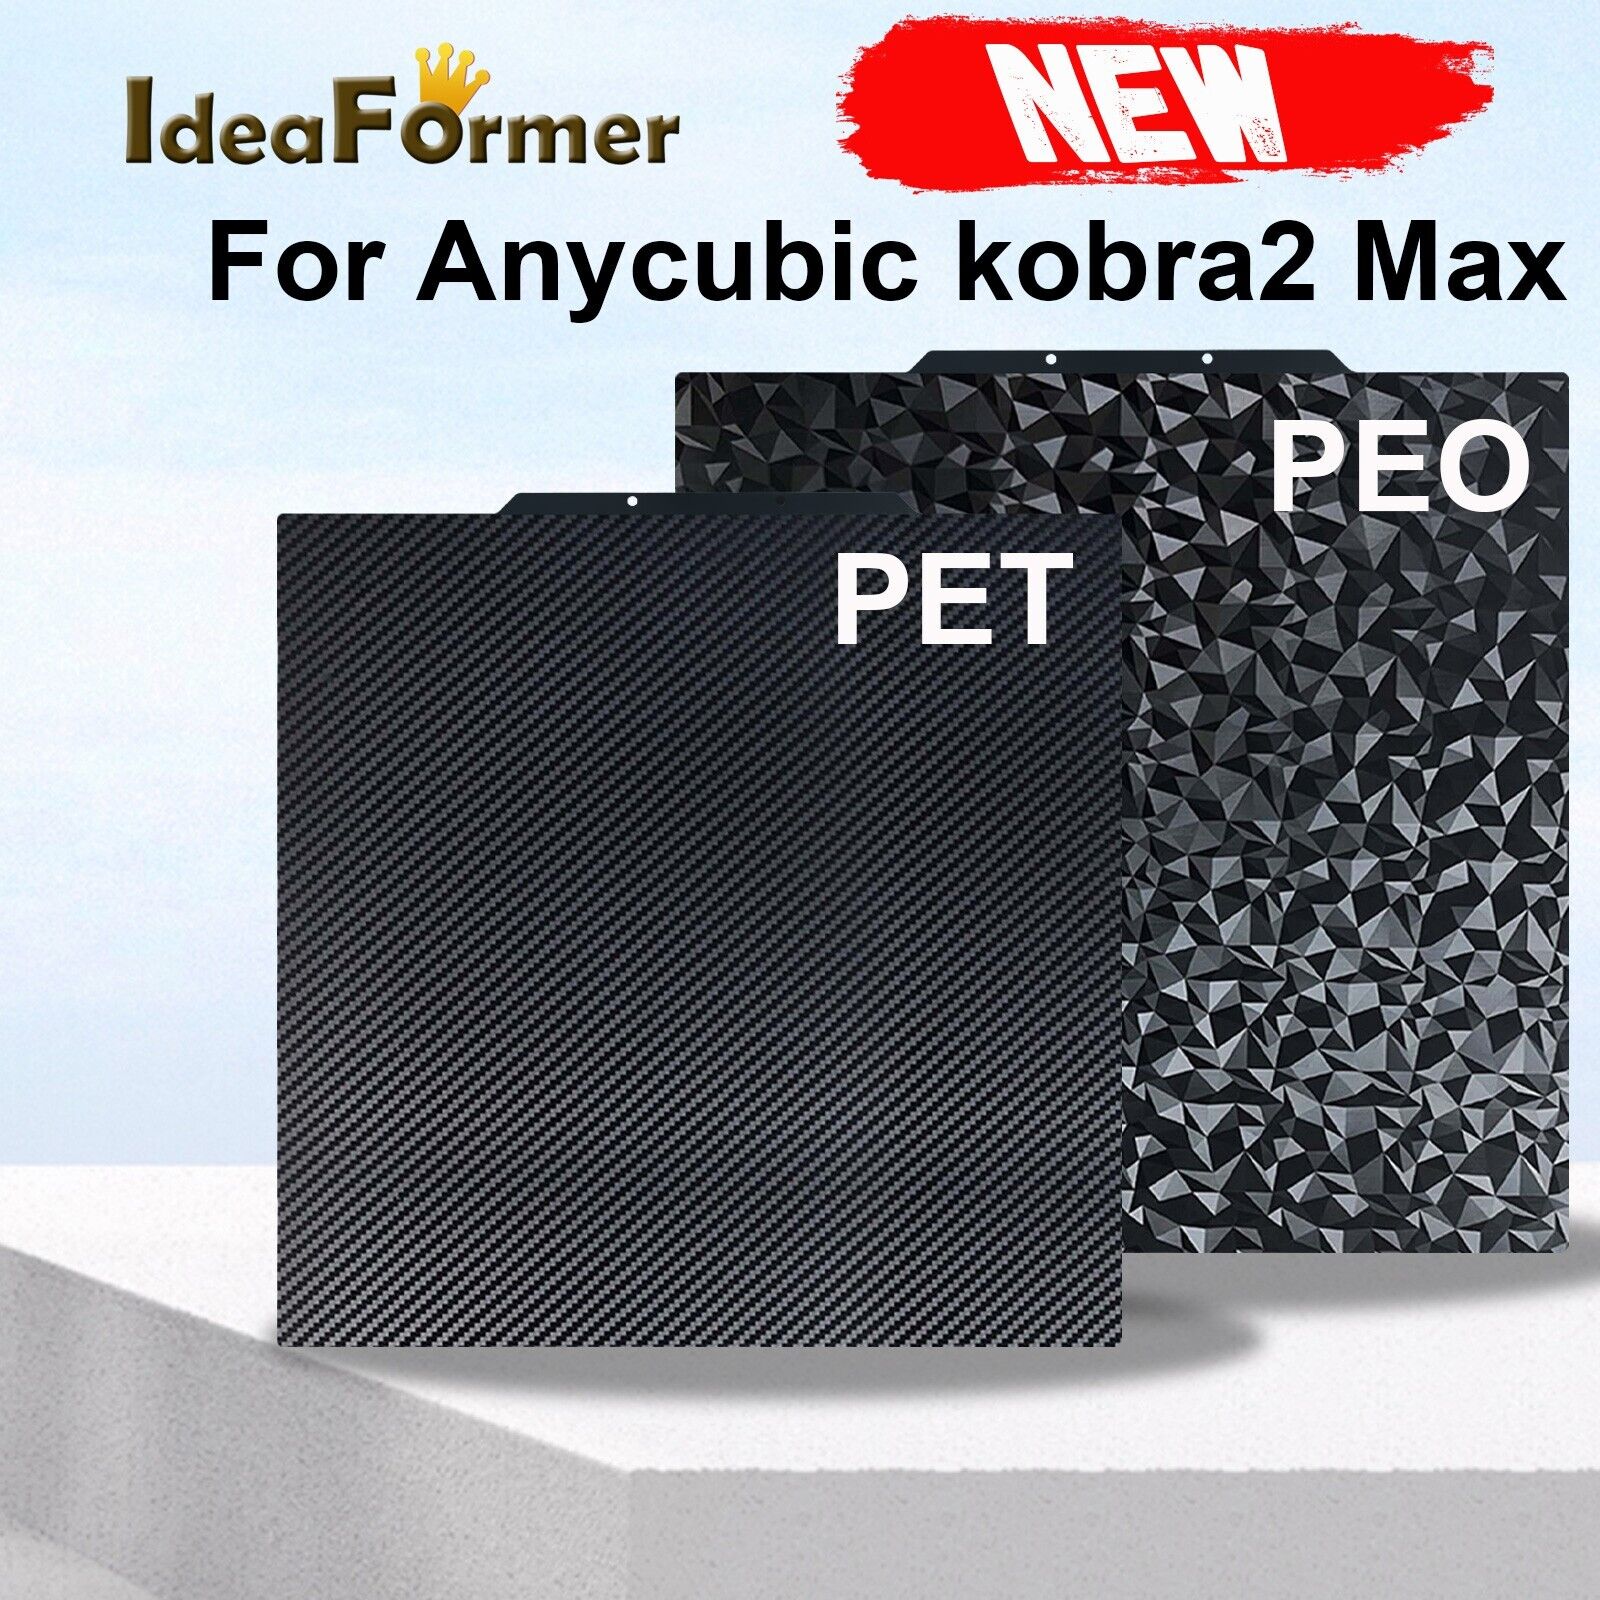 Build Plate for Anycubic kobra 2 Max,Smooth PEO PET Spring Steel Sheet 430x430mm